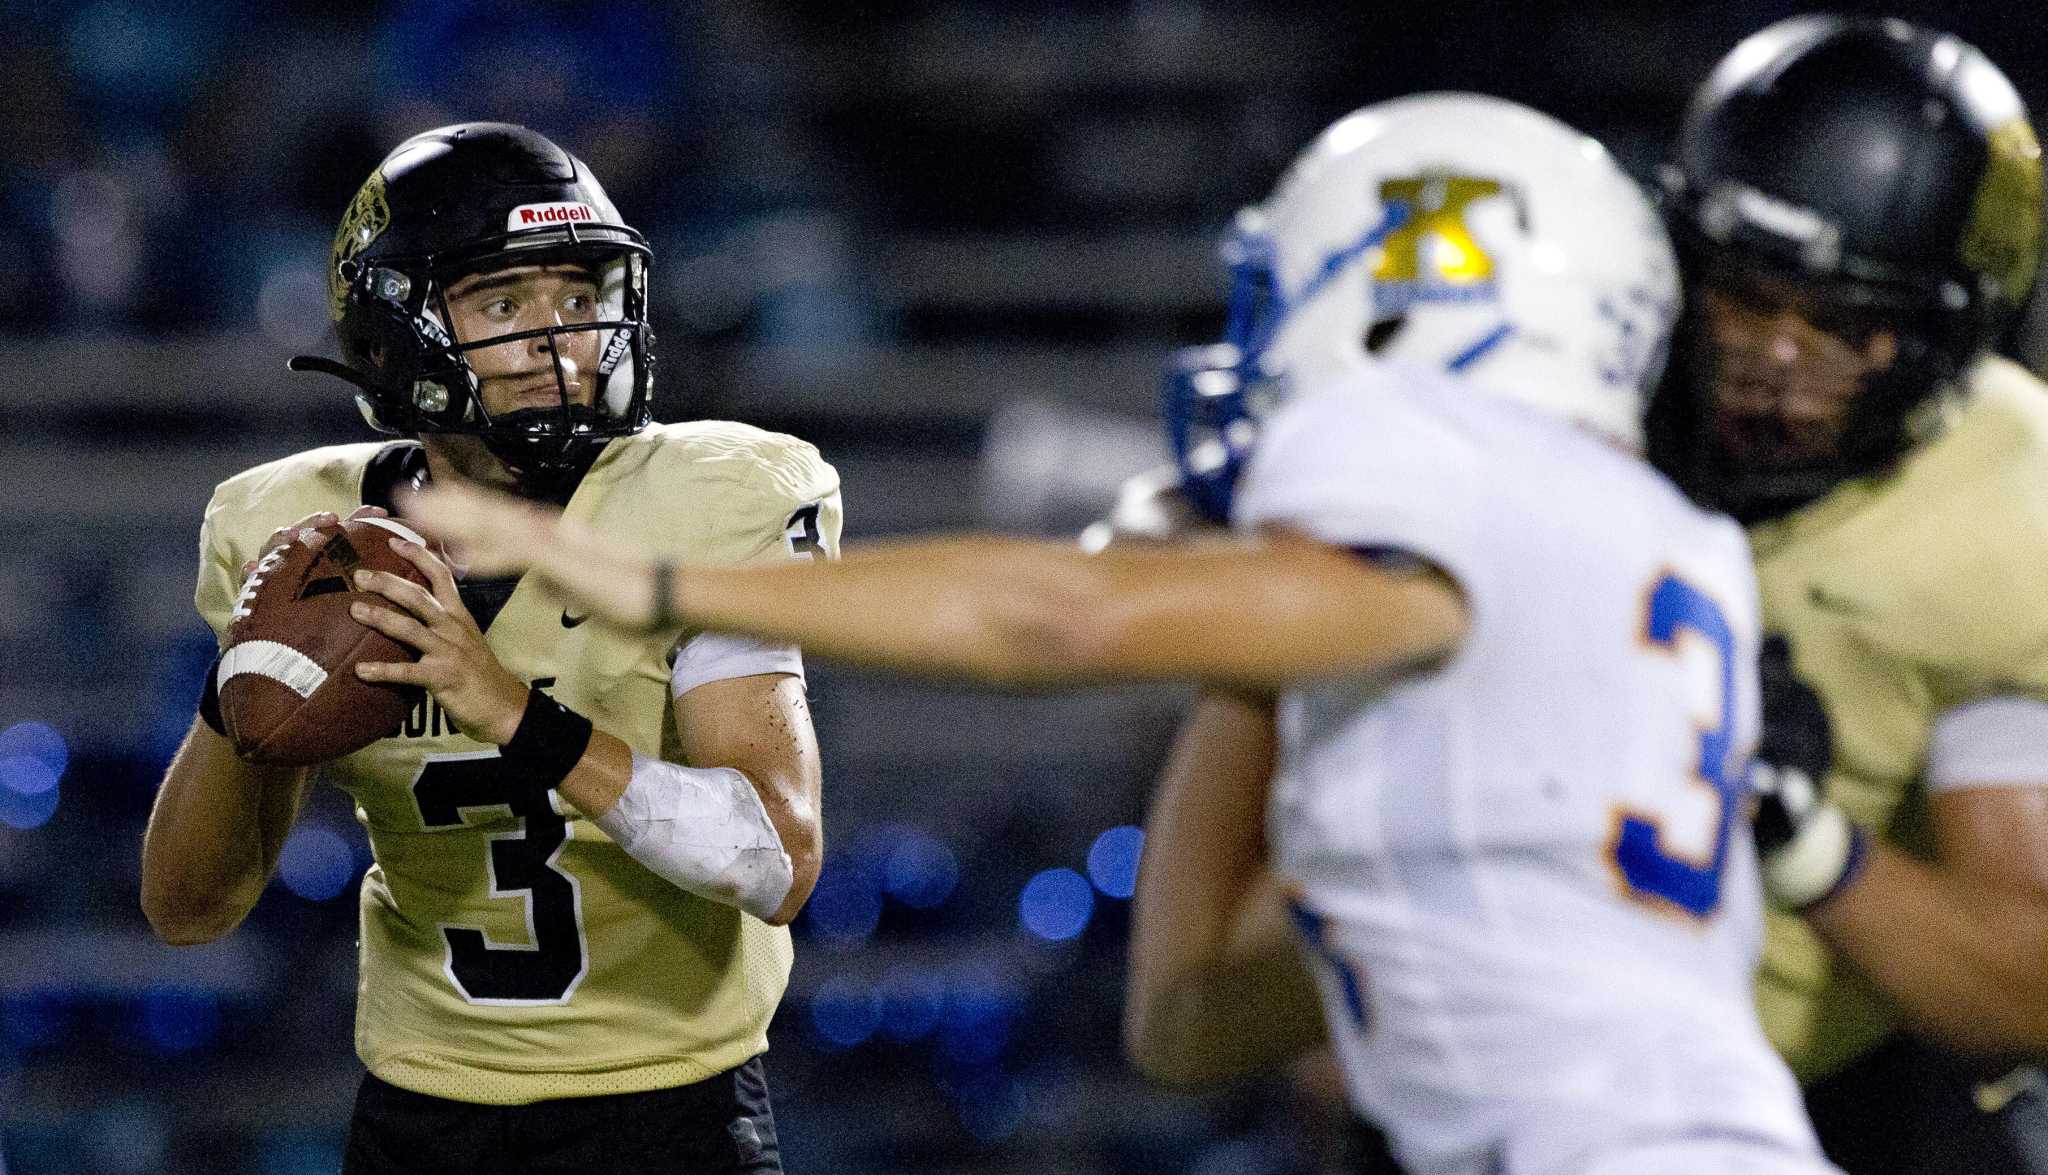 FOOTBALL: Conroe tied atop 15-6A standings heading into bye week